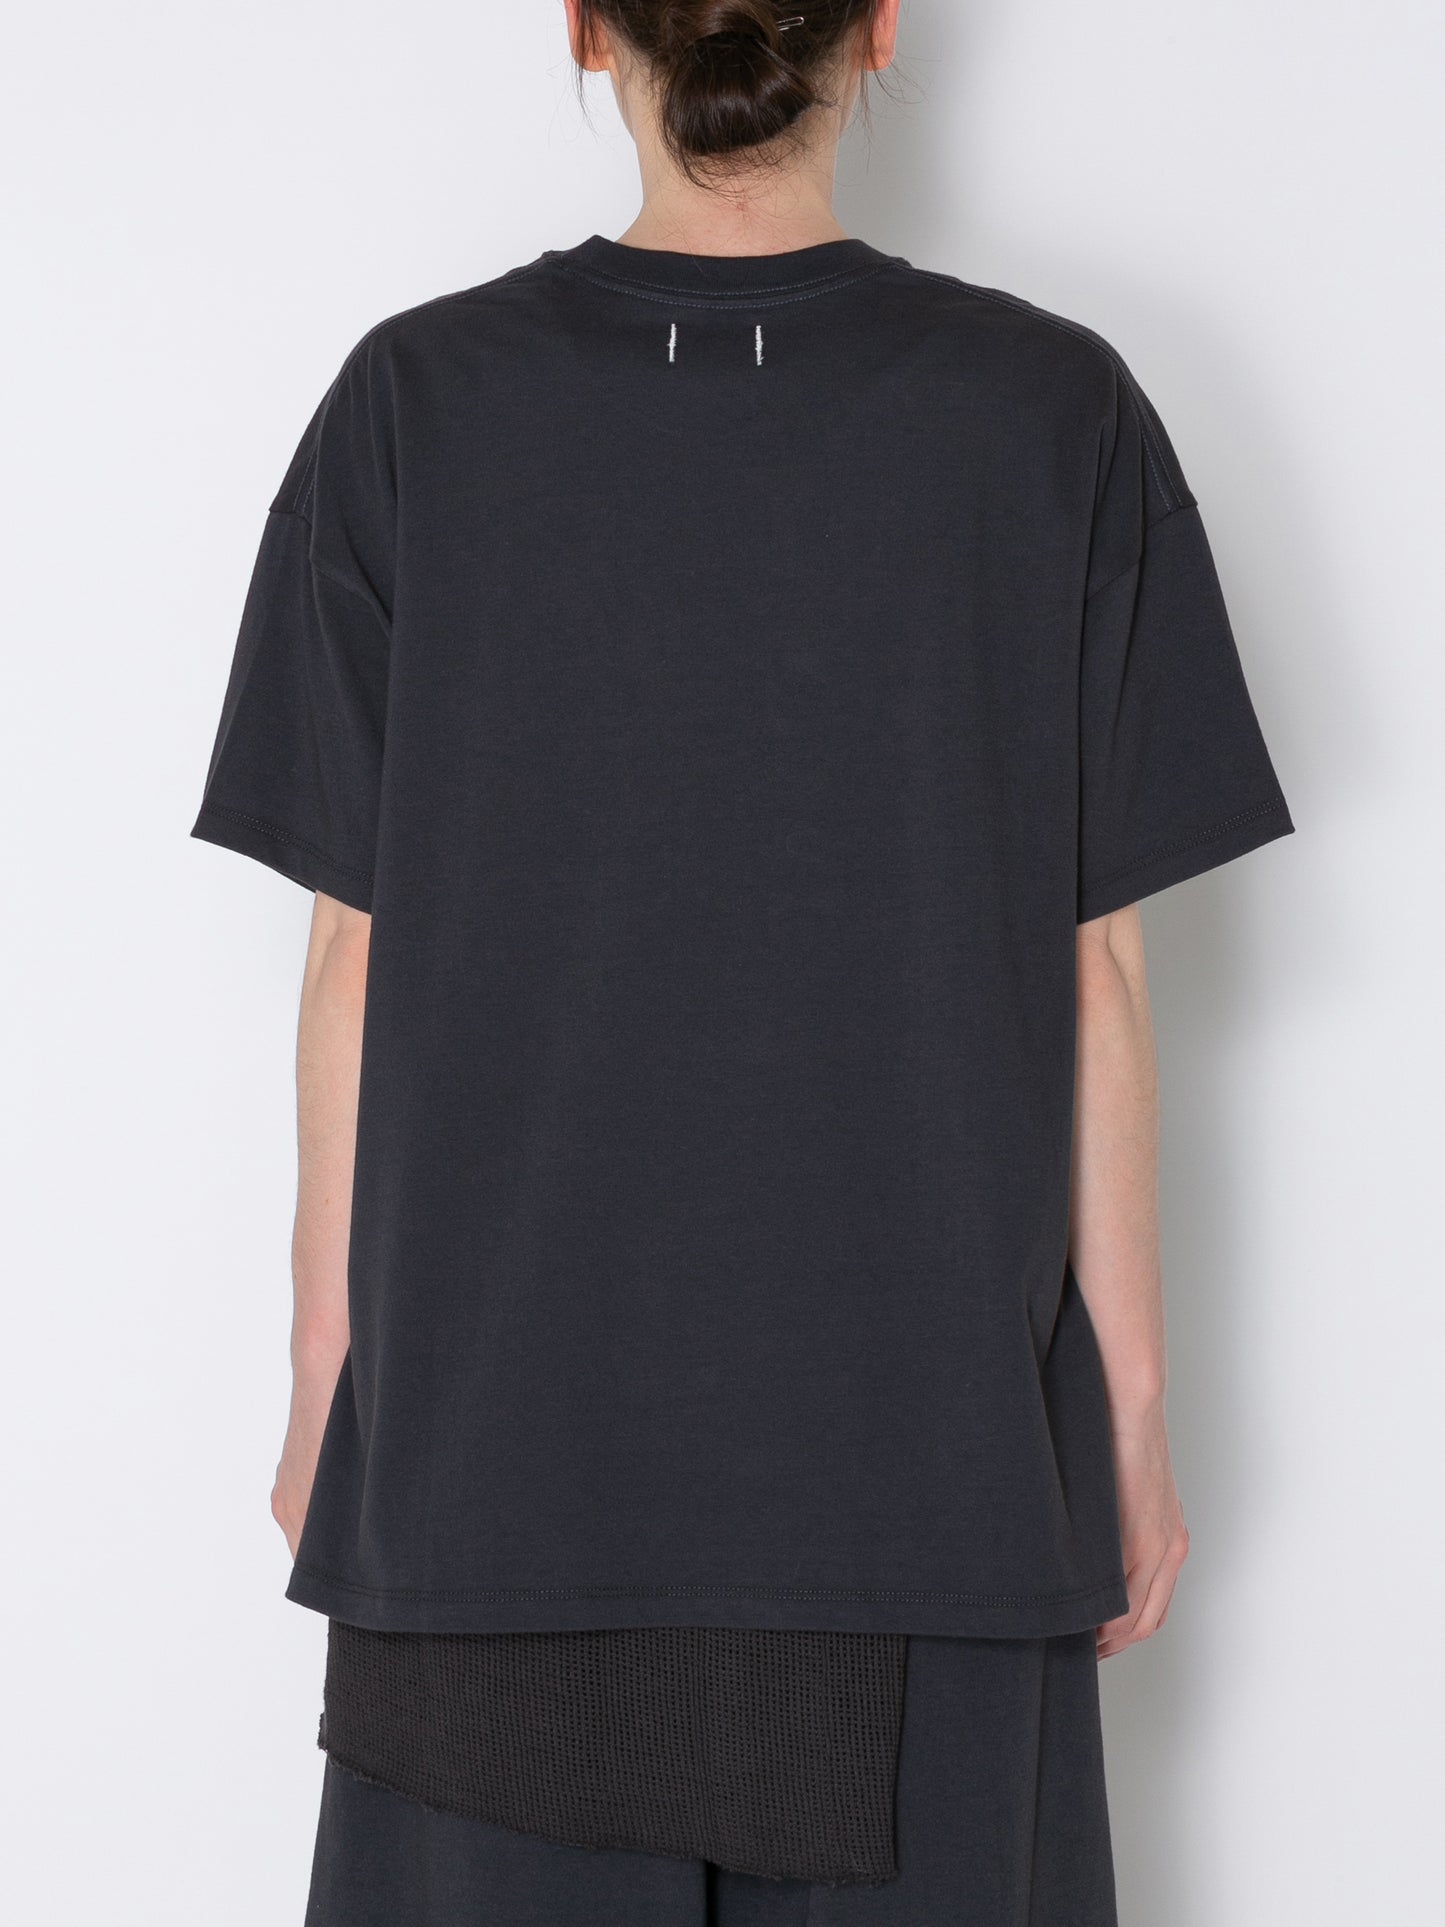 BAGGY S/S TEE ORGANIC COTTON JERSEY AM-C0004 Charcoal